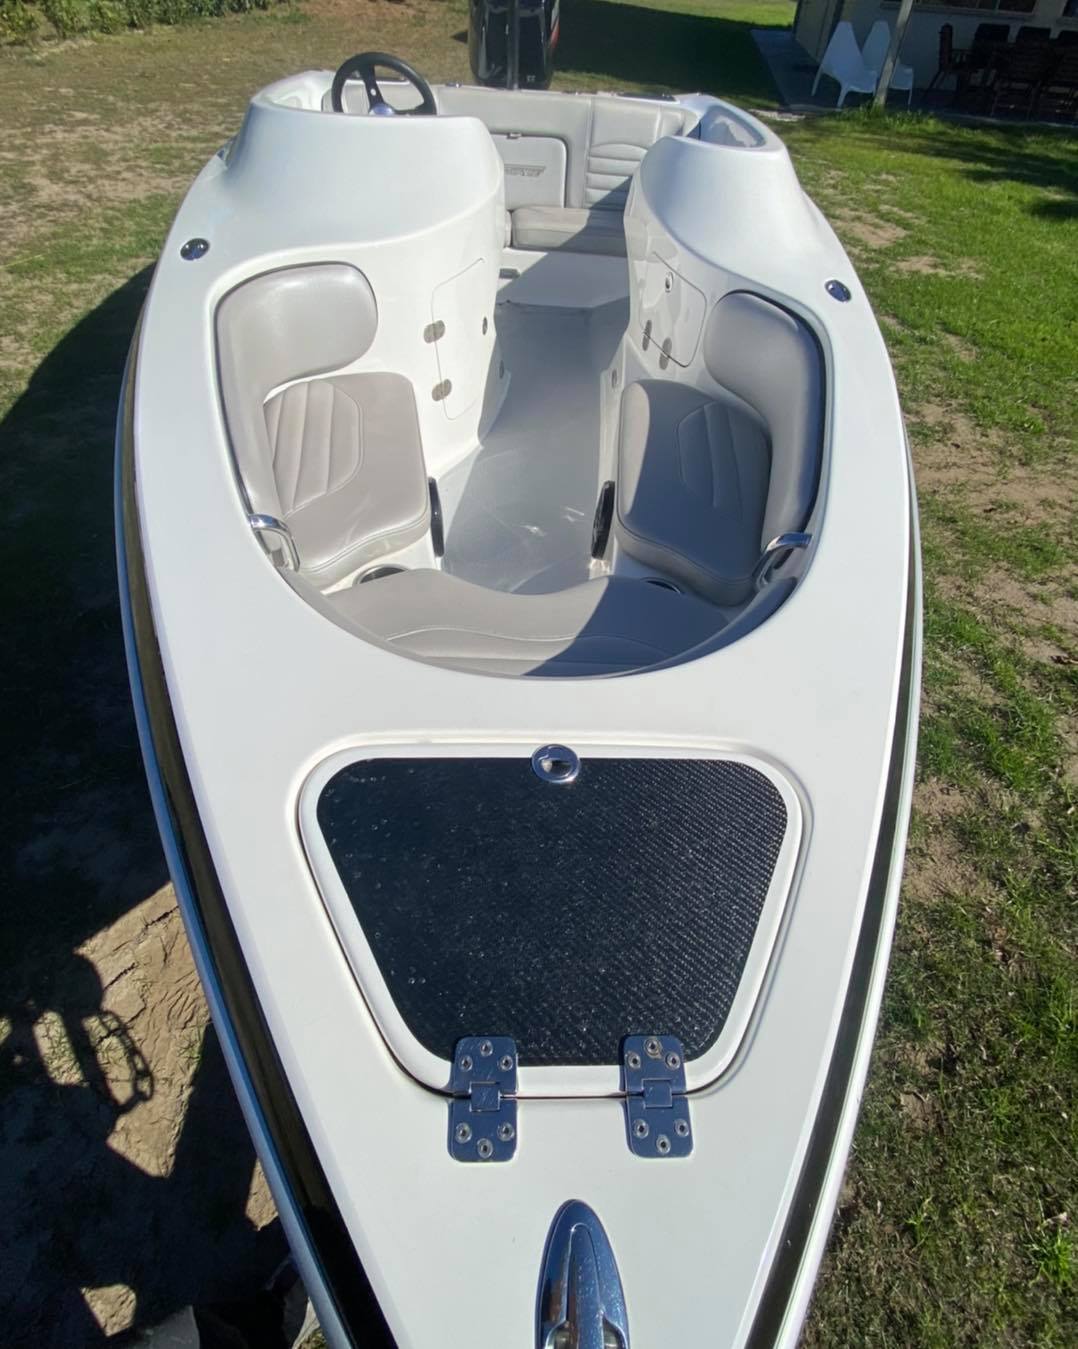 Here at Force Boats, we pride ourselves on quality builds. Testament to this is seeing this 8year old, Force F14 come back for a service and it still looks like new!